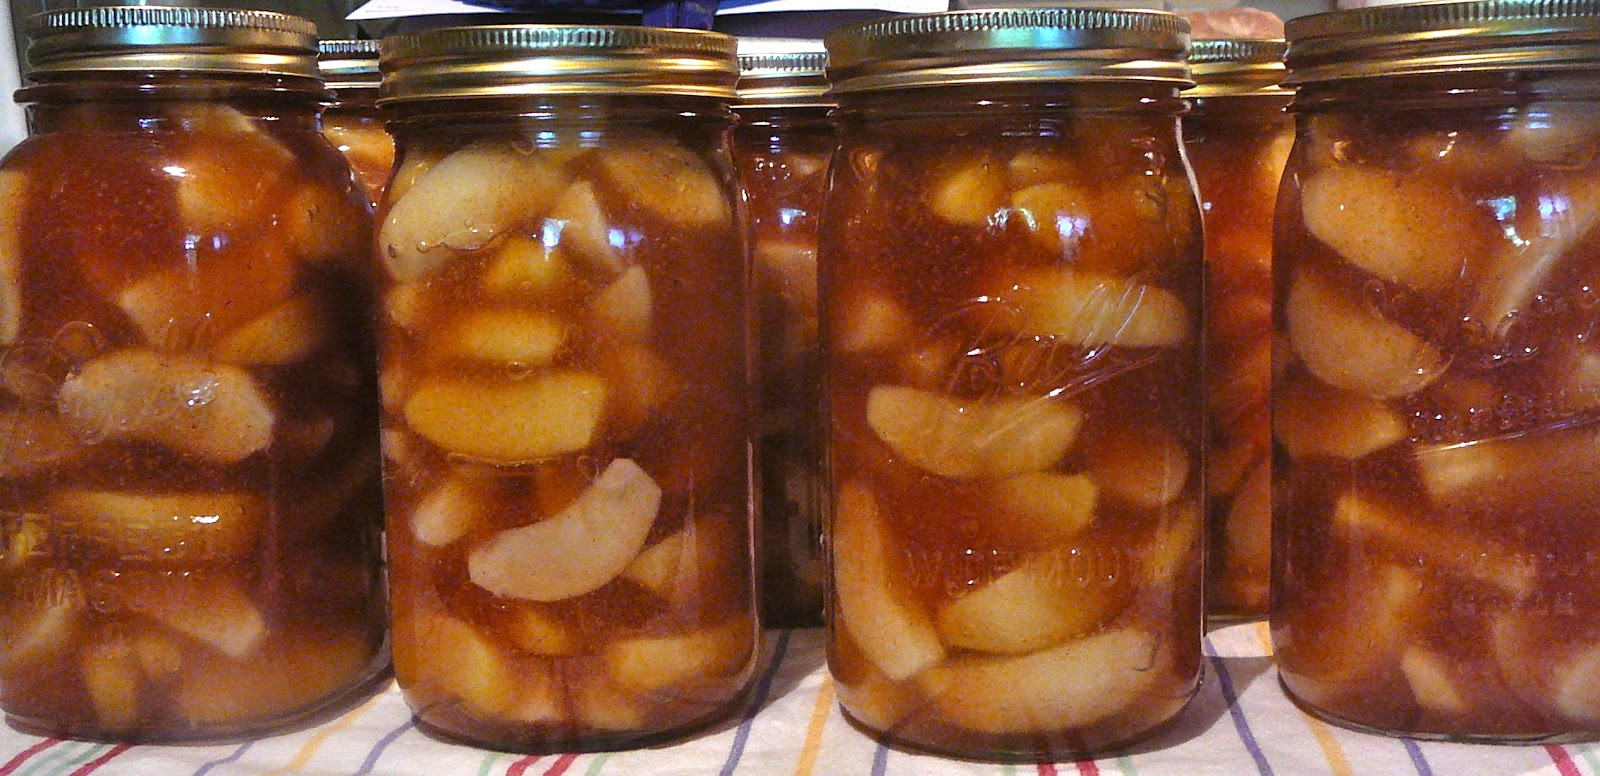 Apple Pie Filling For Canning
 The Hidden Pantry Canning Cinnamon Apple Pie Filling